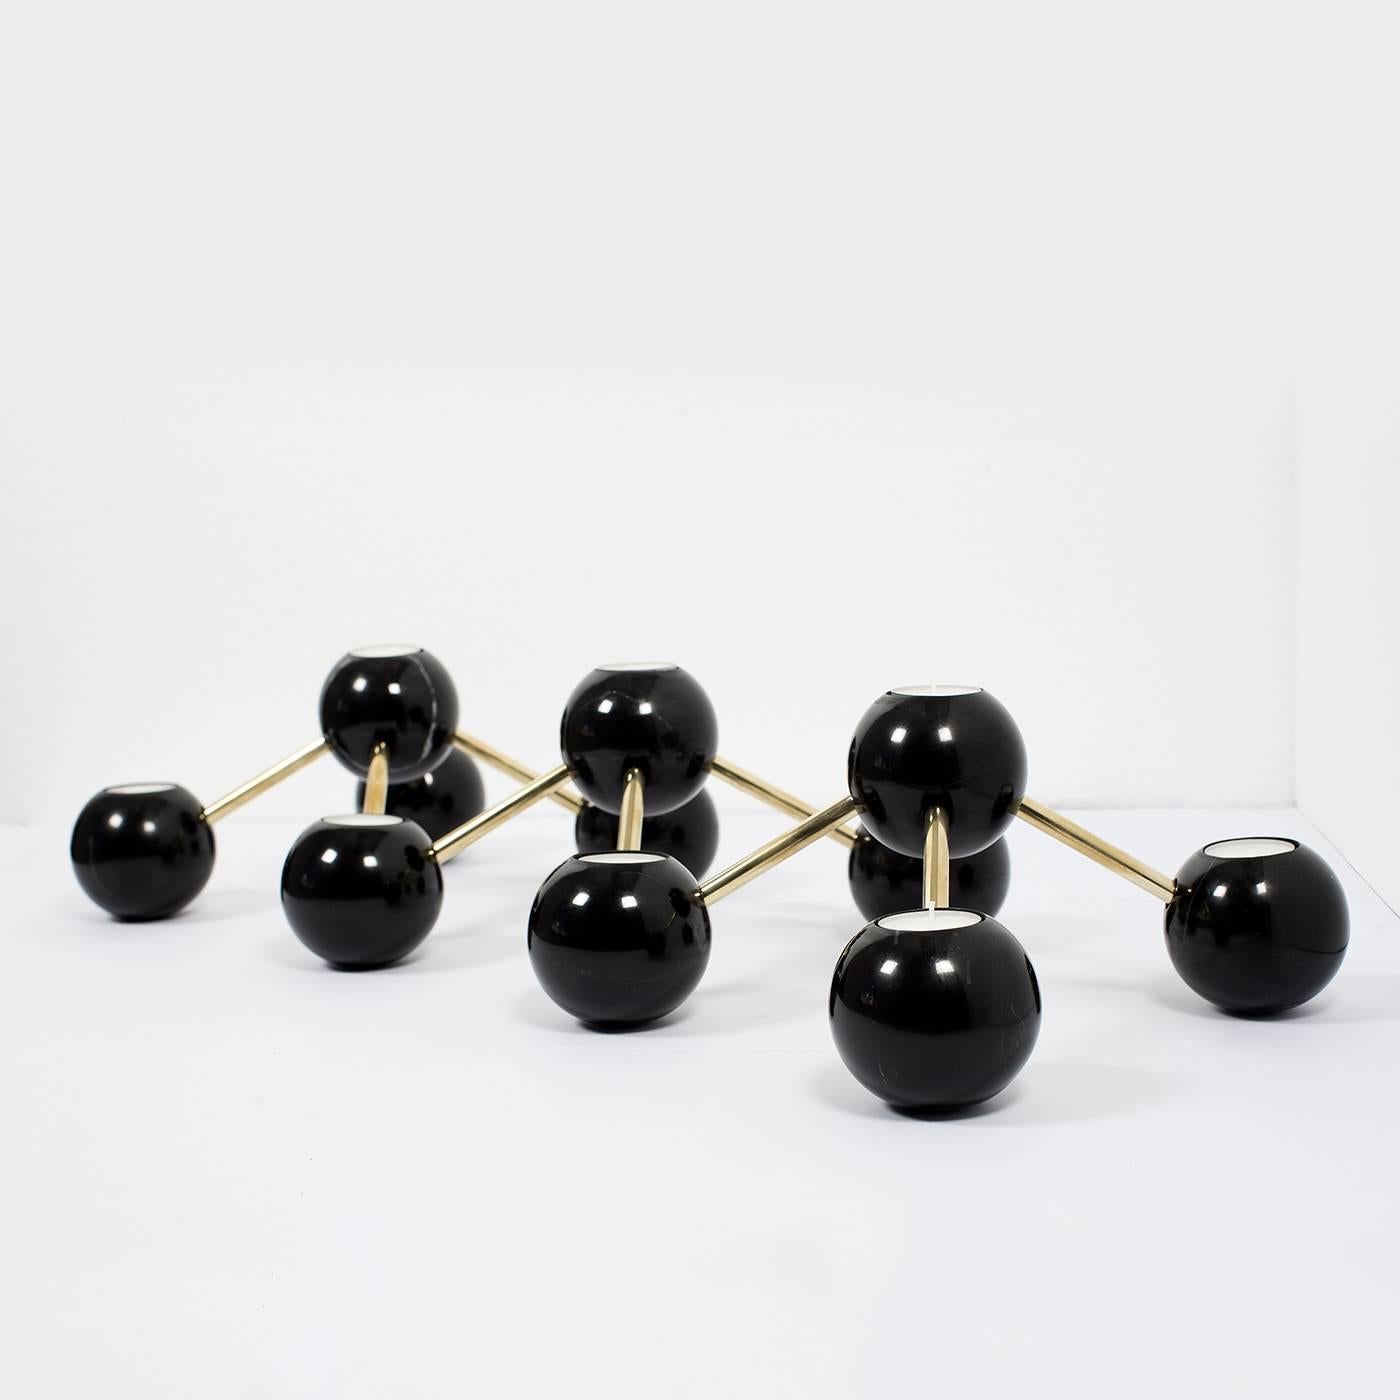 Modern and Minimalist, this candelabra will make an elegant statement on a console, shelf, or mantlepiece. Its 11 spheres in black Marquina marble are connected to each other with brass elements that have a natural polish. This striking piece of